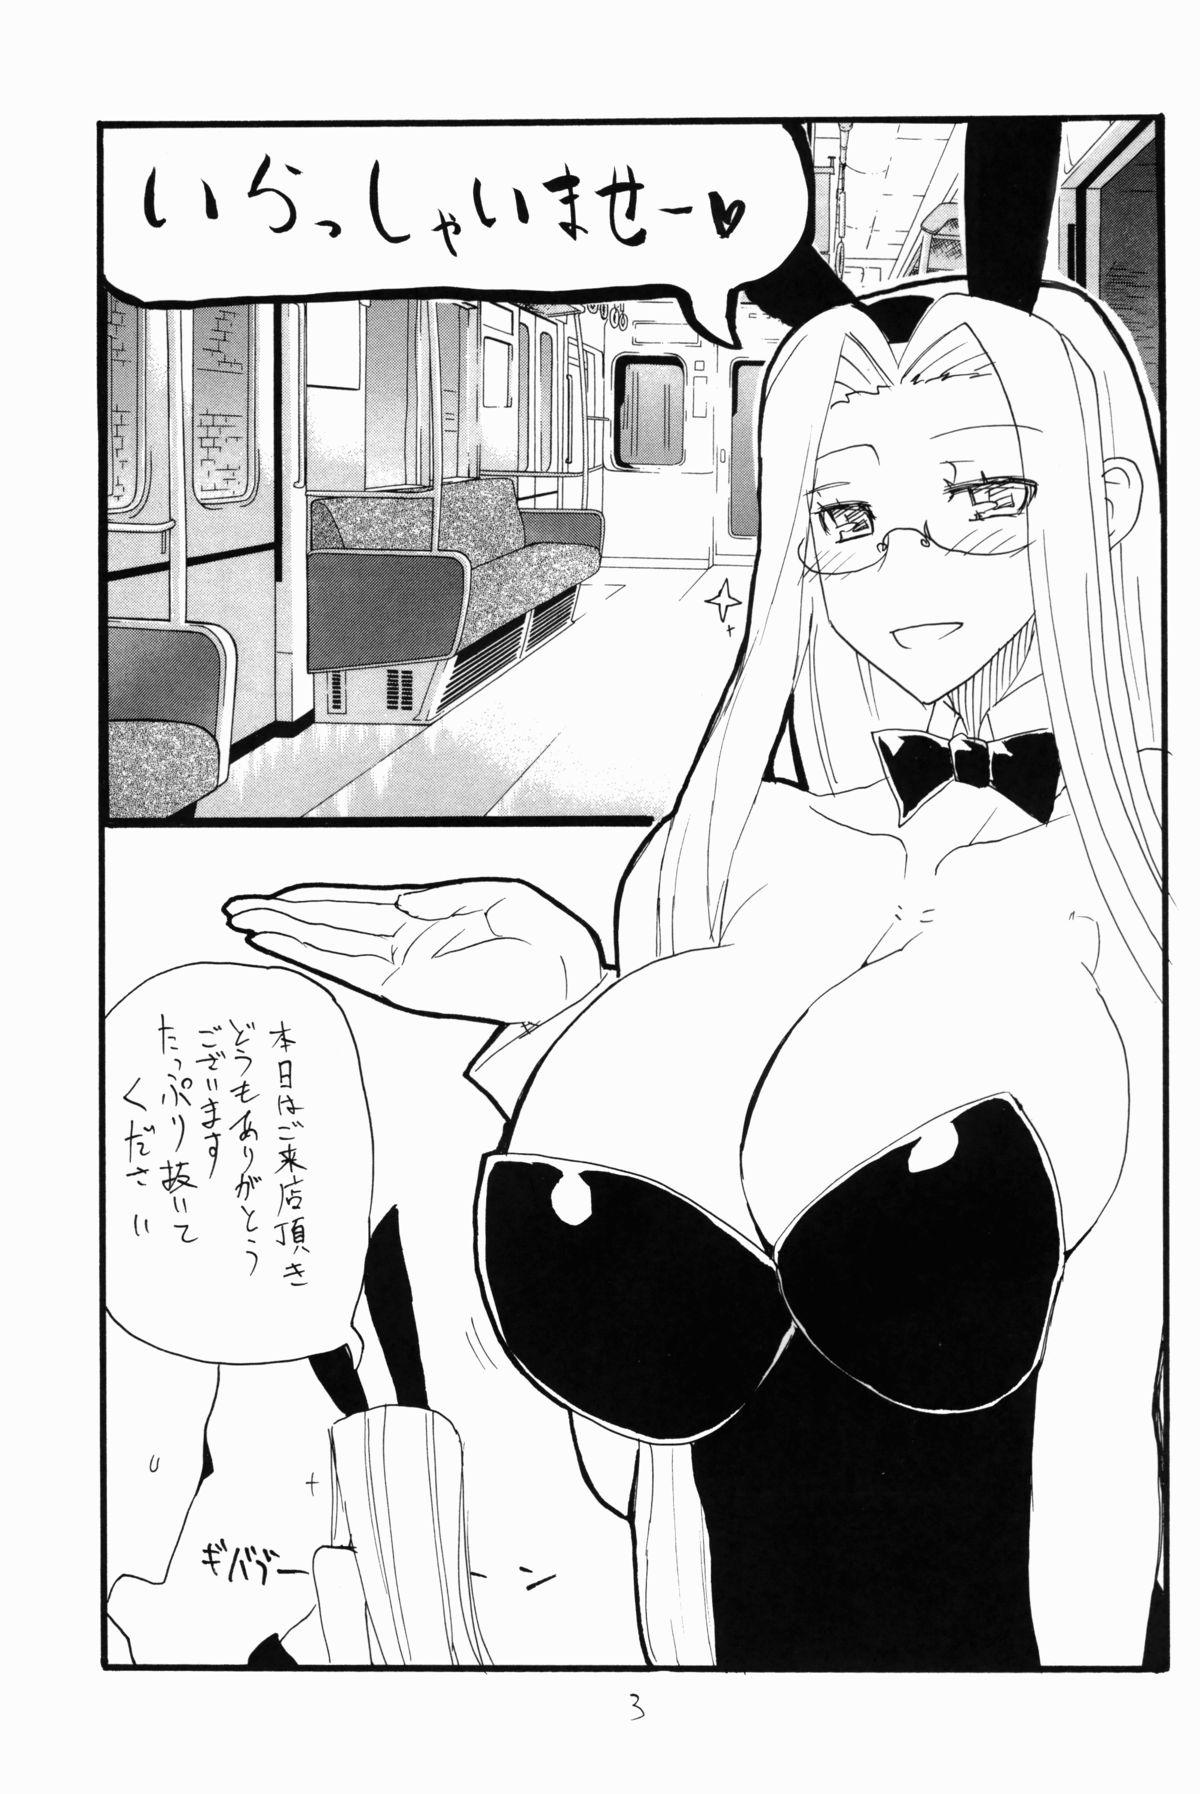 Bigtits Onaho no Hi - Fate stay night Chick - Page 3